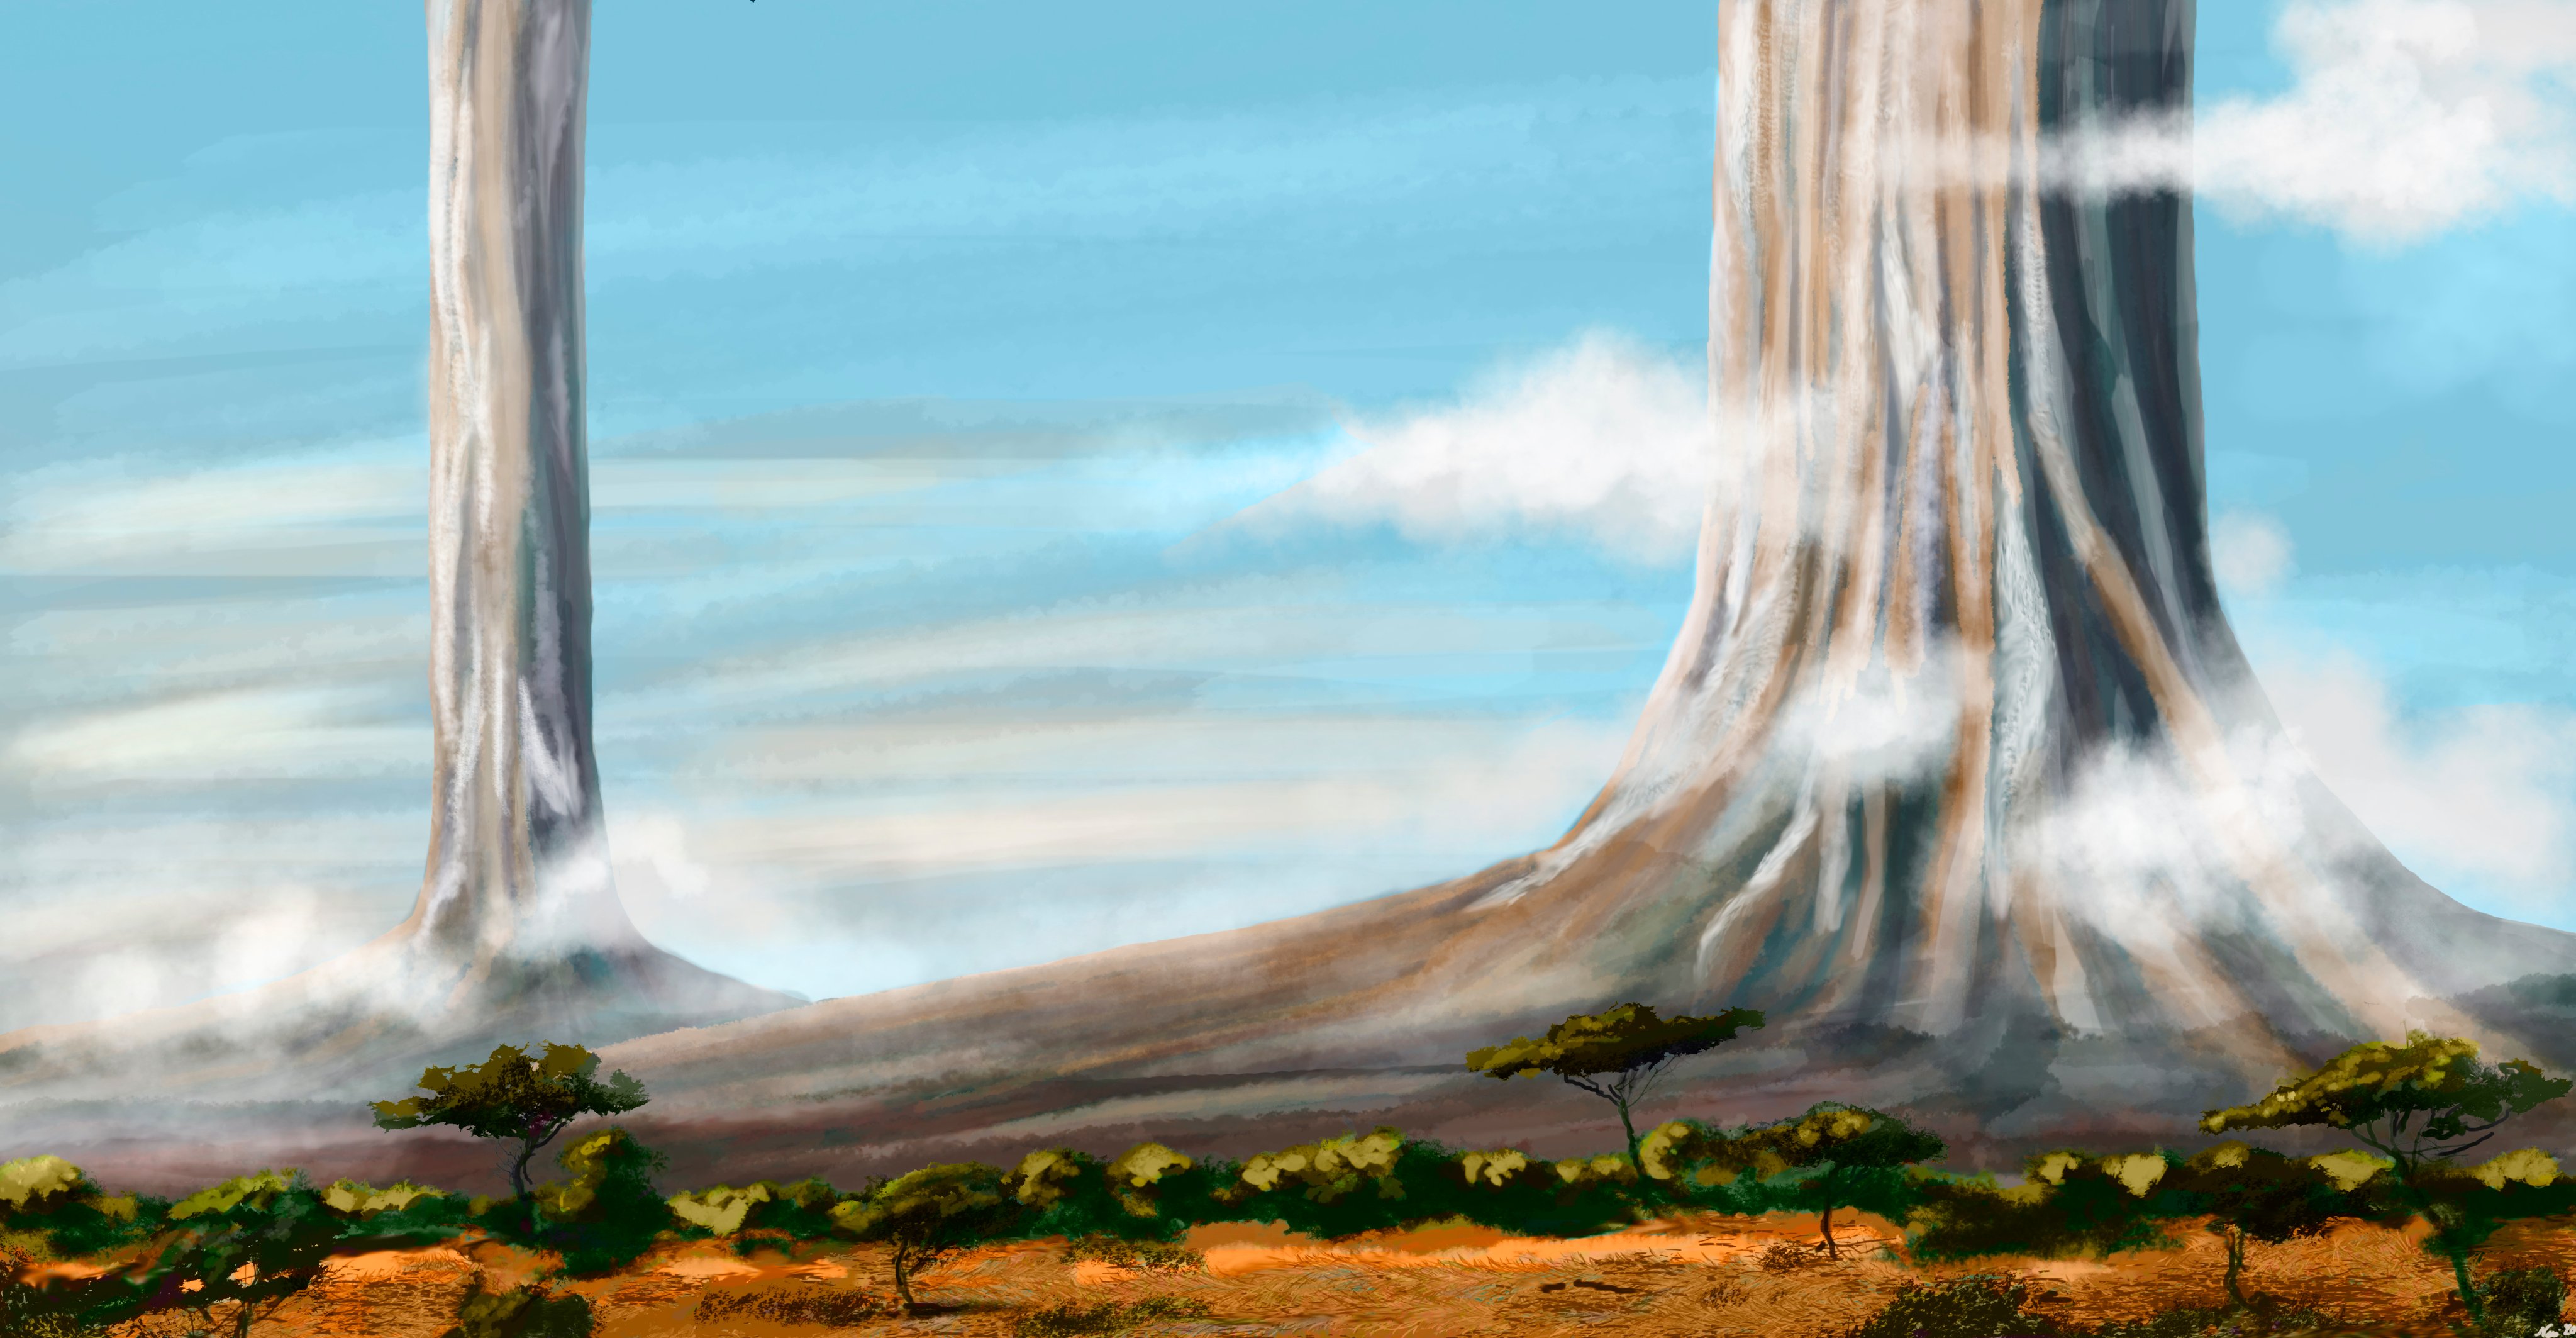 Giant ancient trees